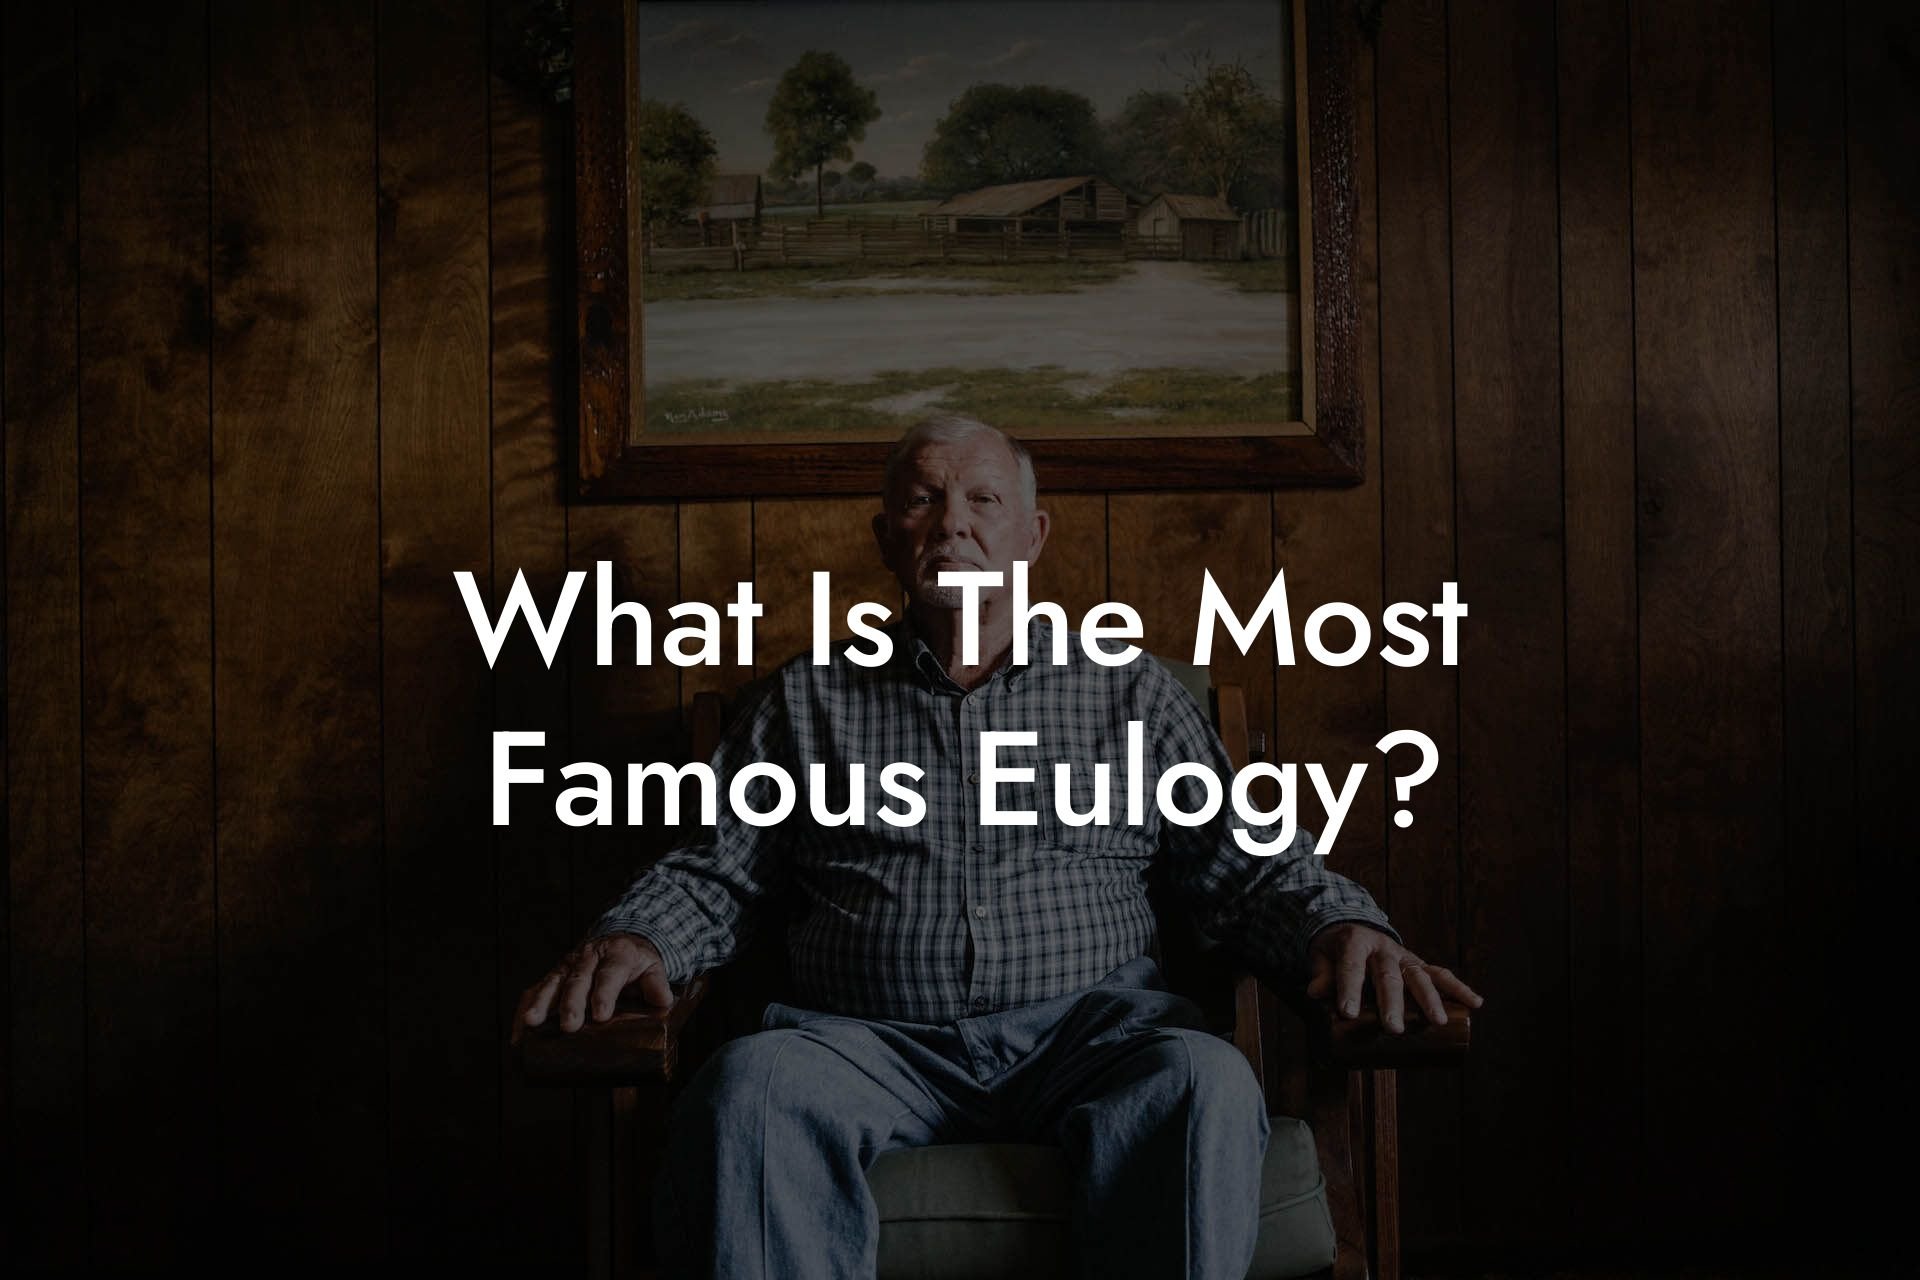 What Is The Most Famous Eulogy?